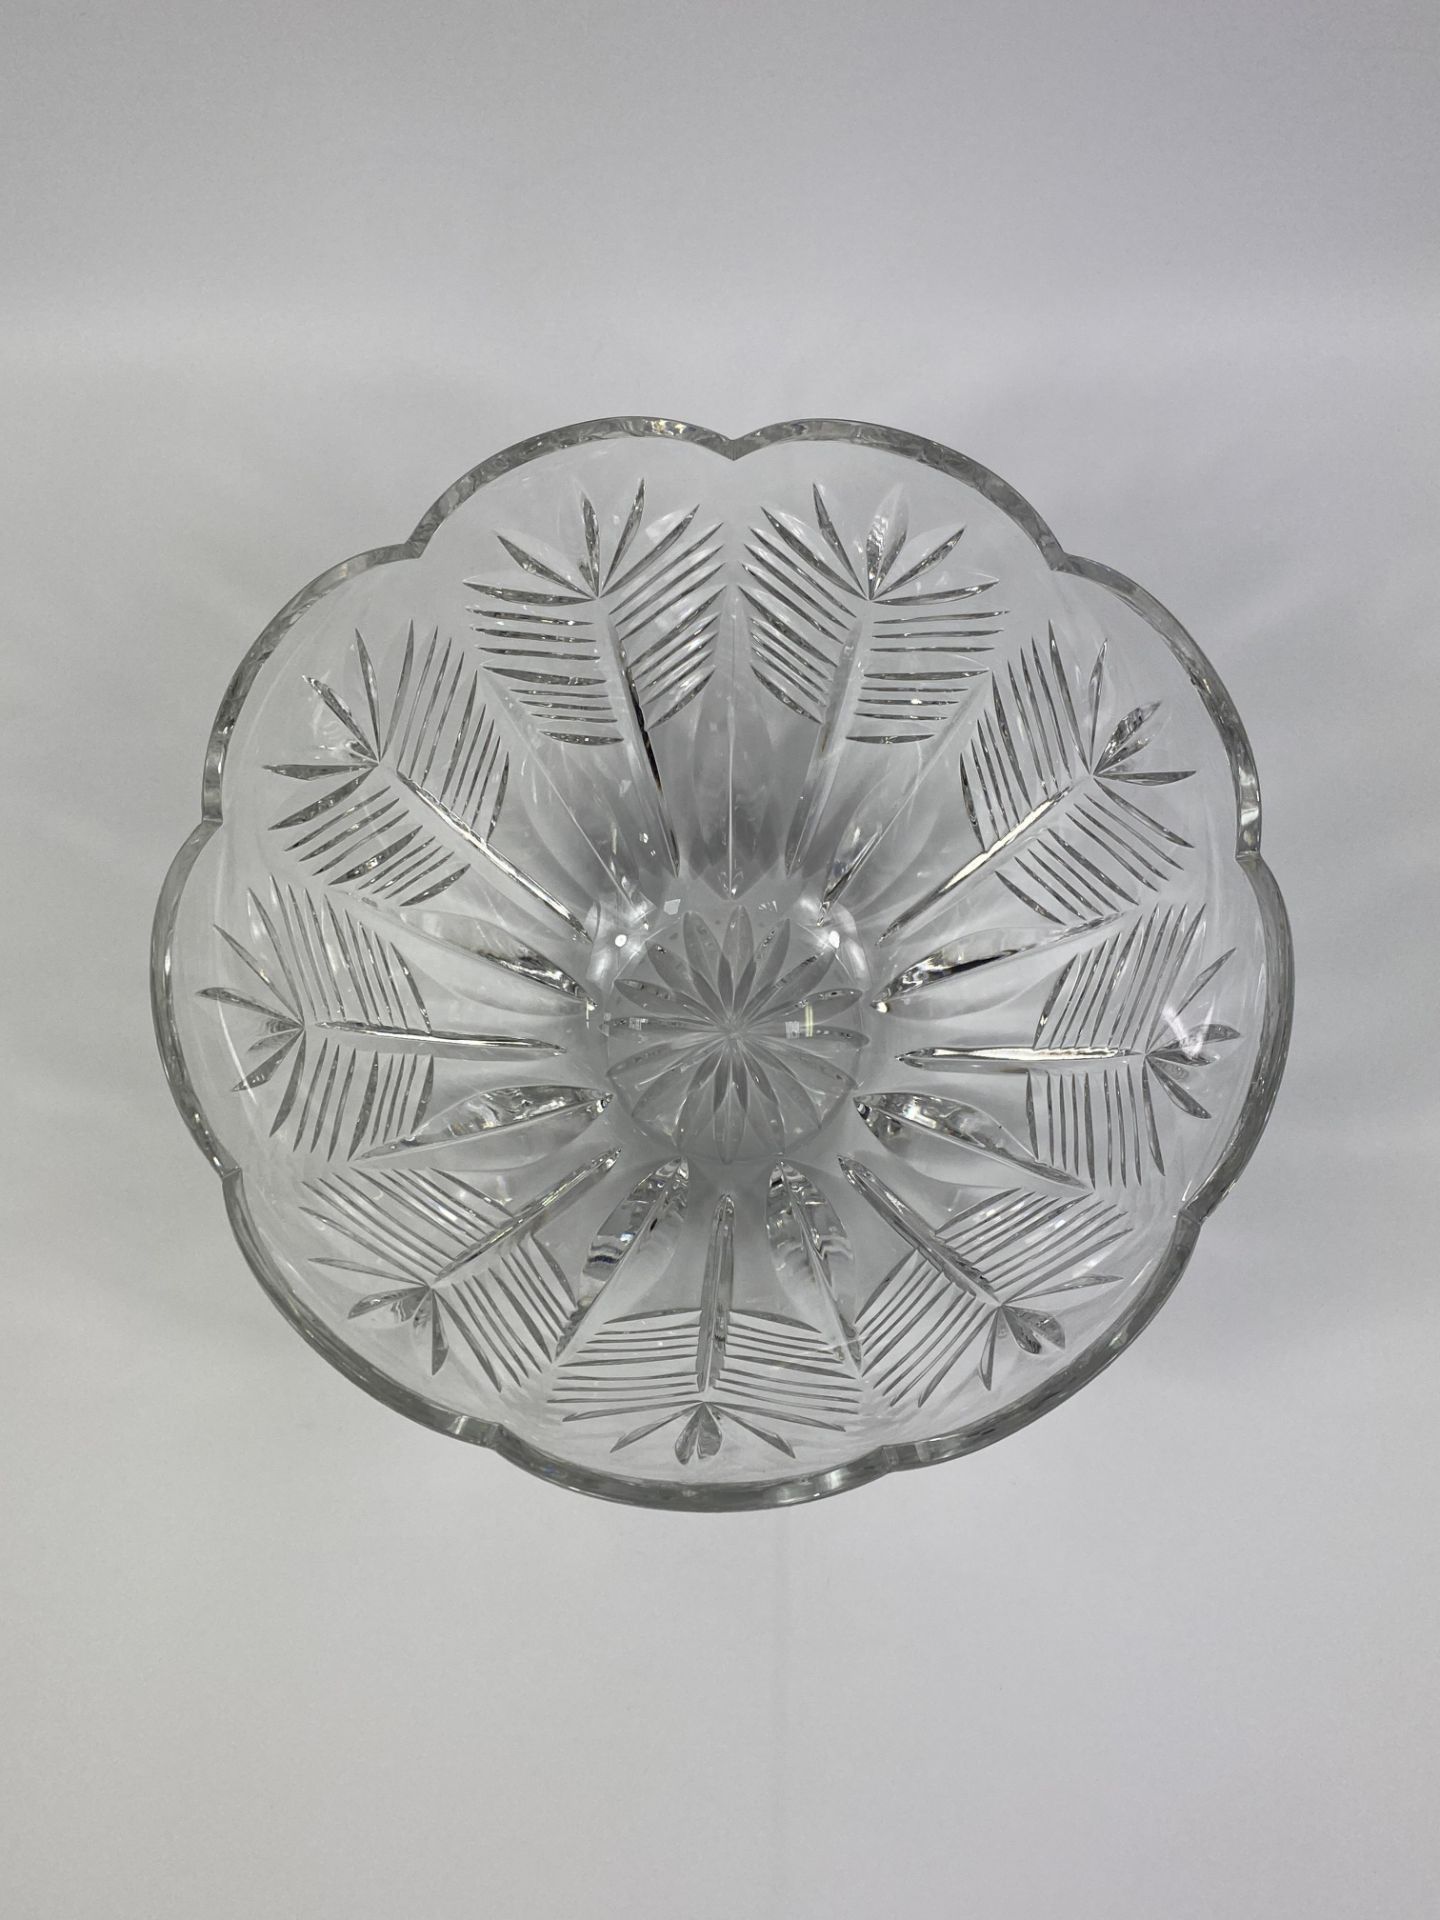 Waterford crystal glass bowl - Image 5 of 6